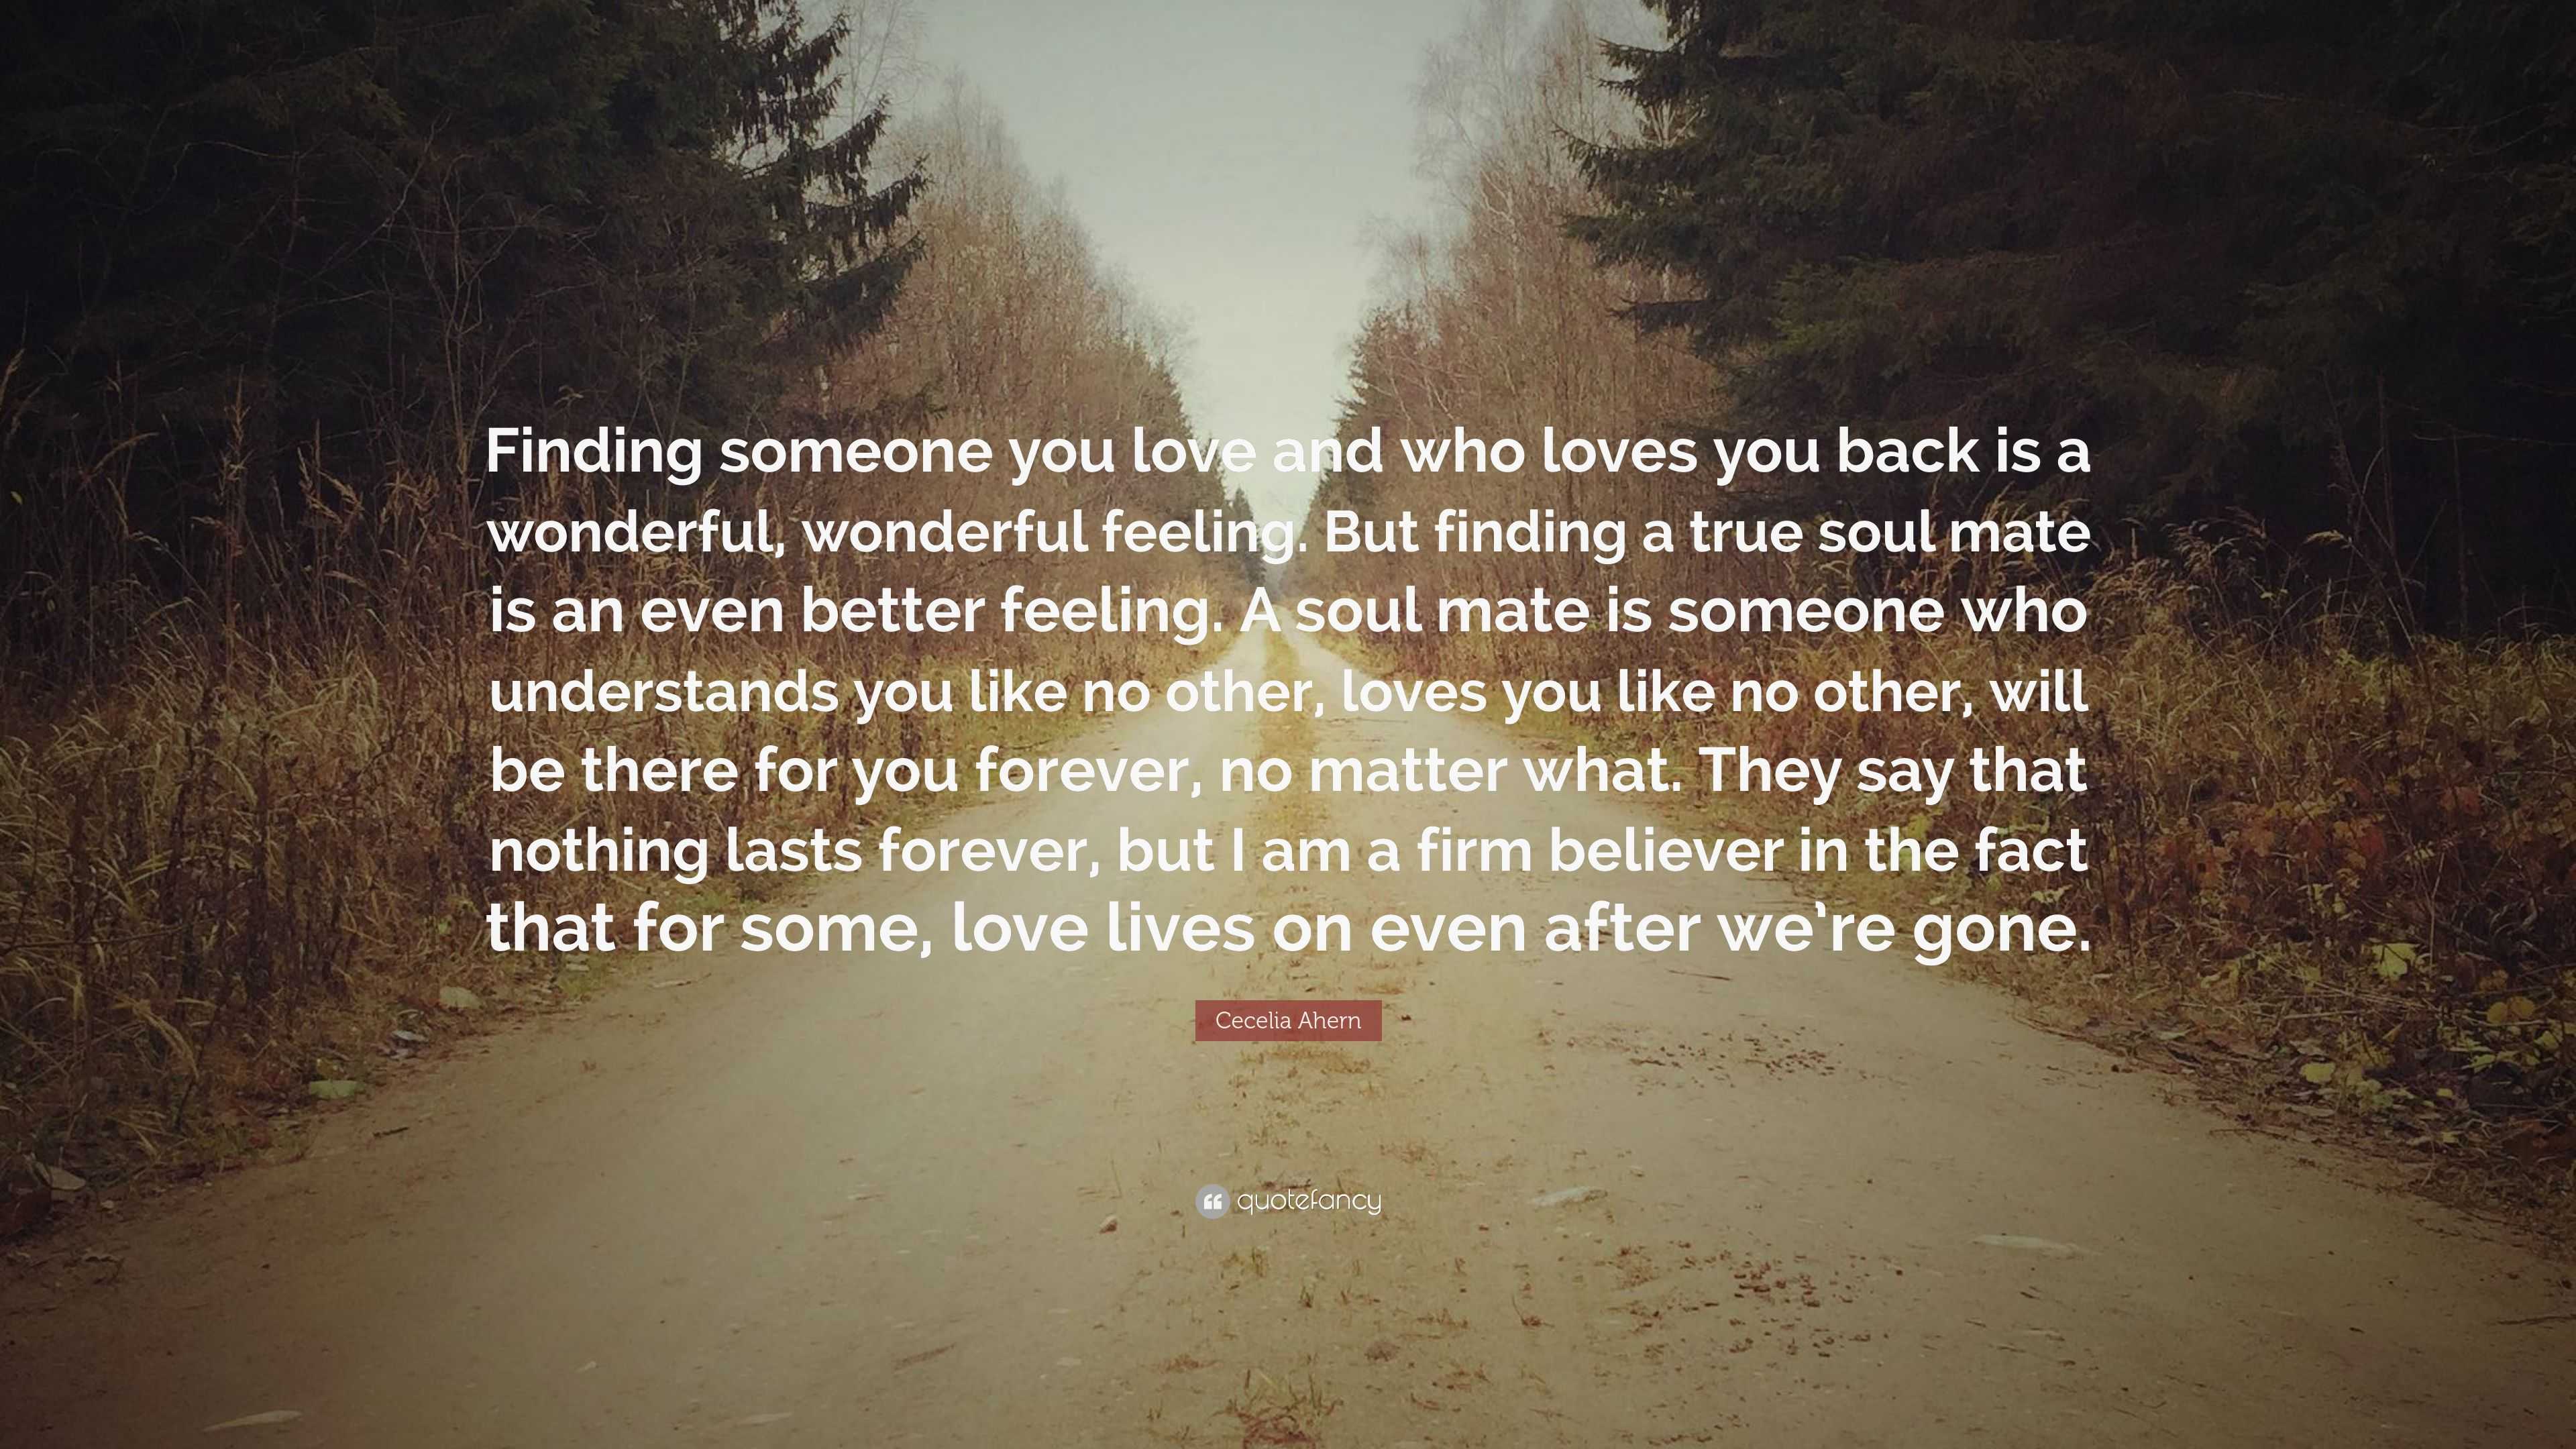 Cecelia Ahern Quote: “Finding someone you love and who loves you back